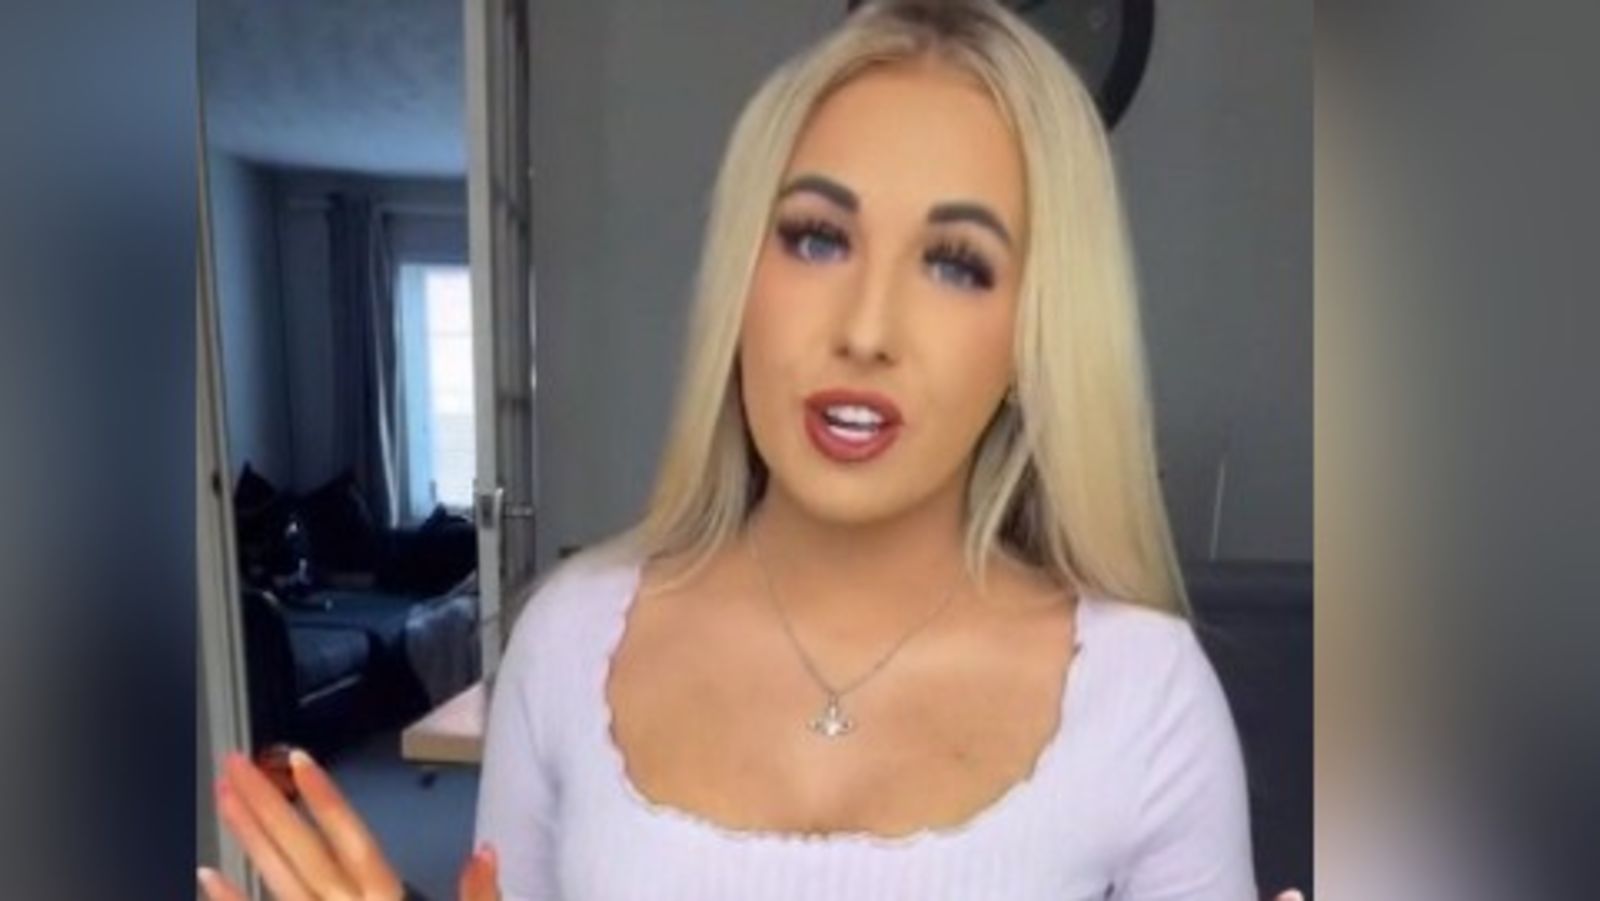 'It's lovely to embrace my disability' - How a TikTok star from Essex ...